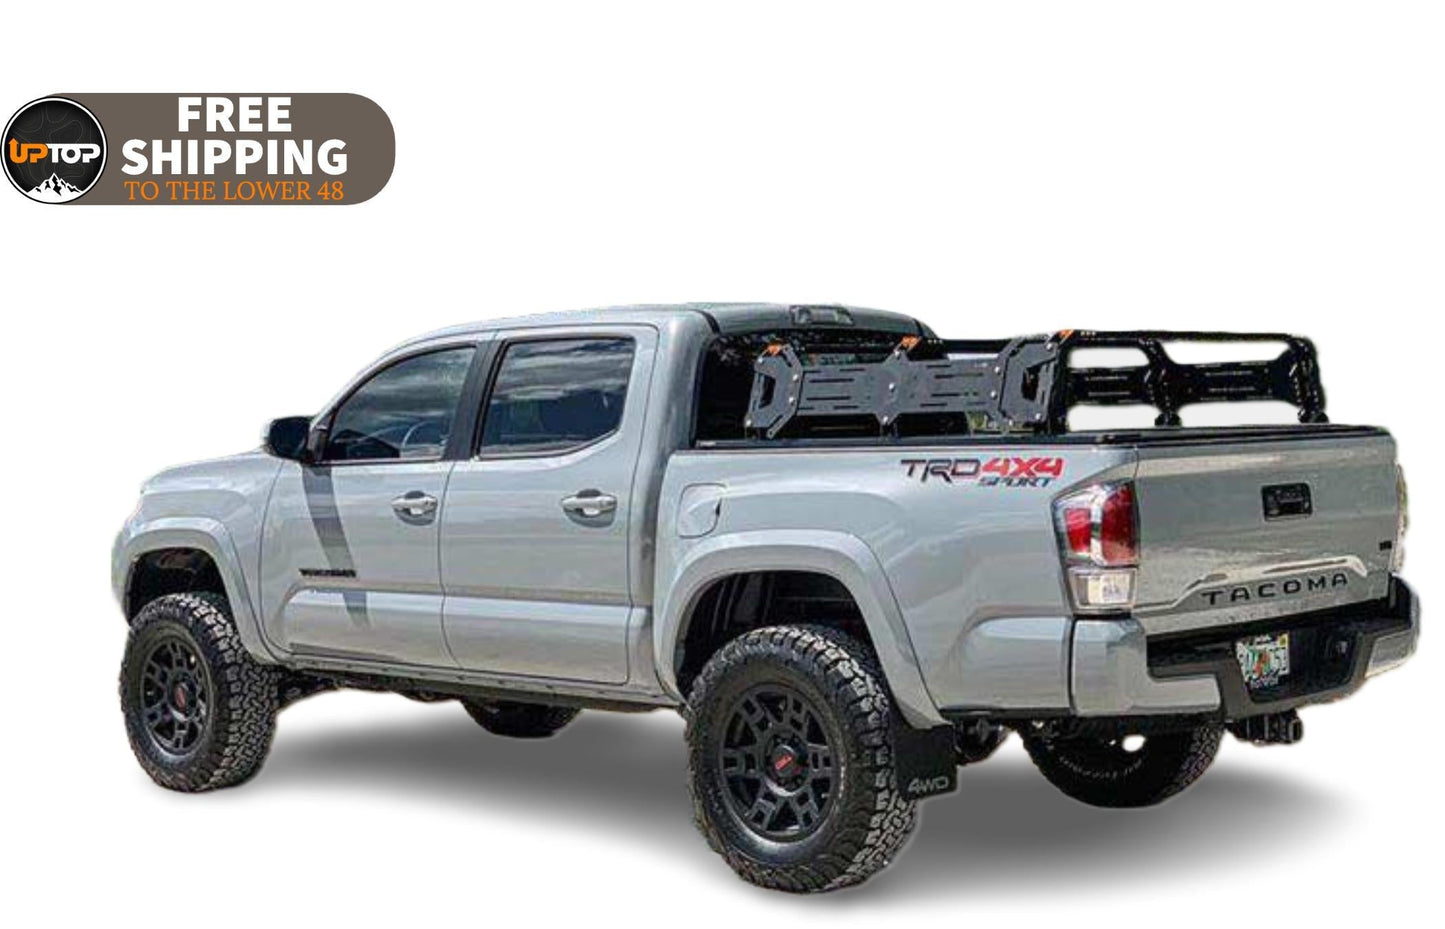 upTOP Overland Overland Bed Rack upTOP Overland | Tacoma TRUSS Bed Rack (2005-2023)